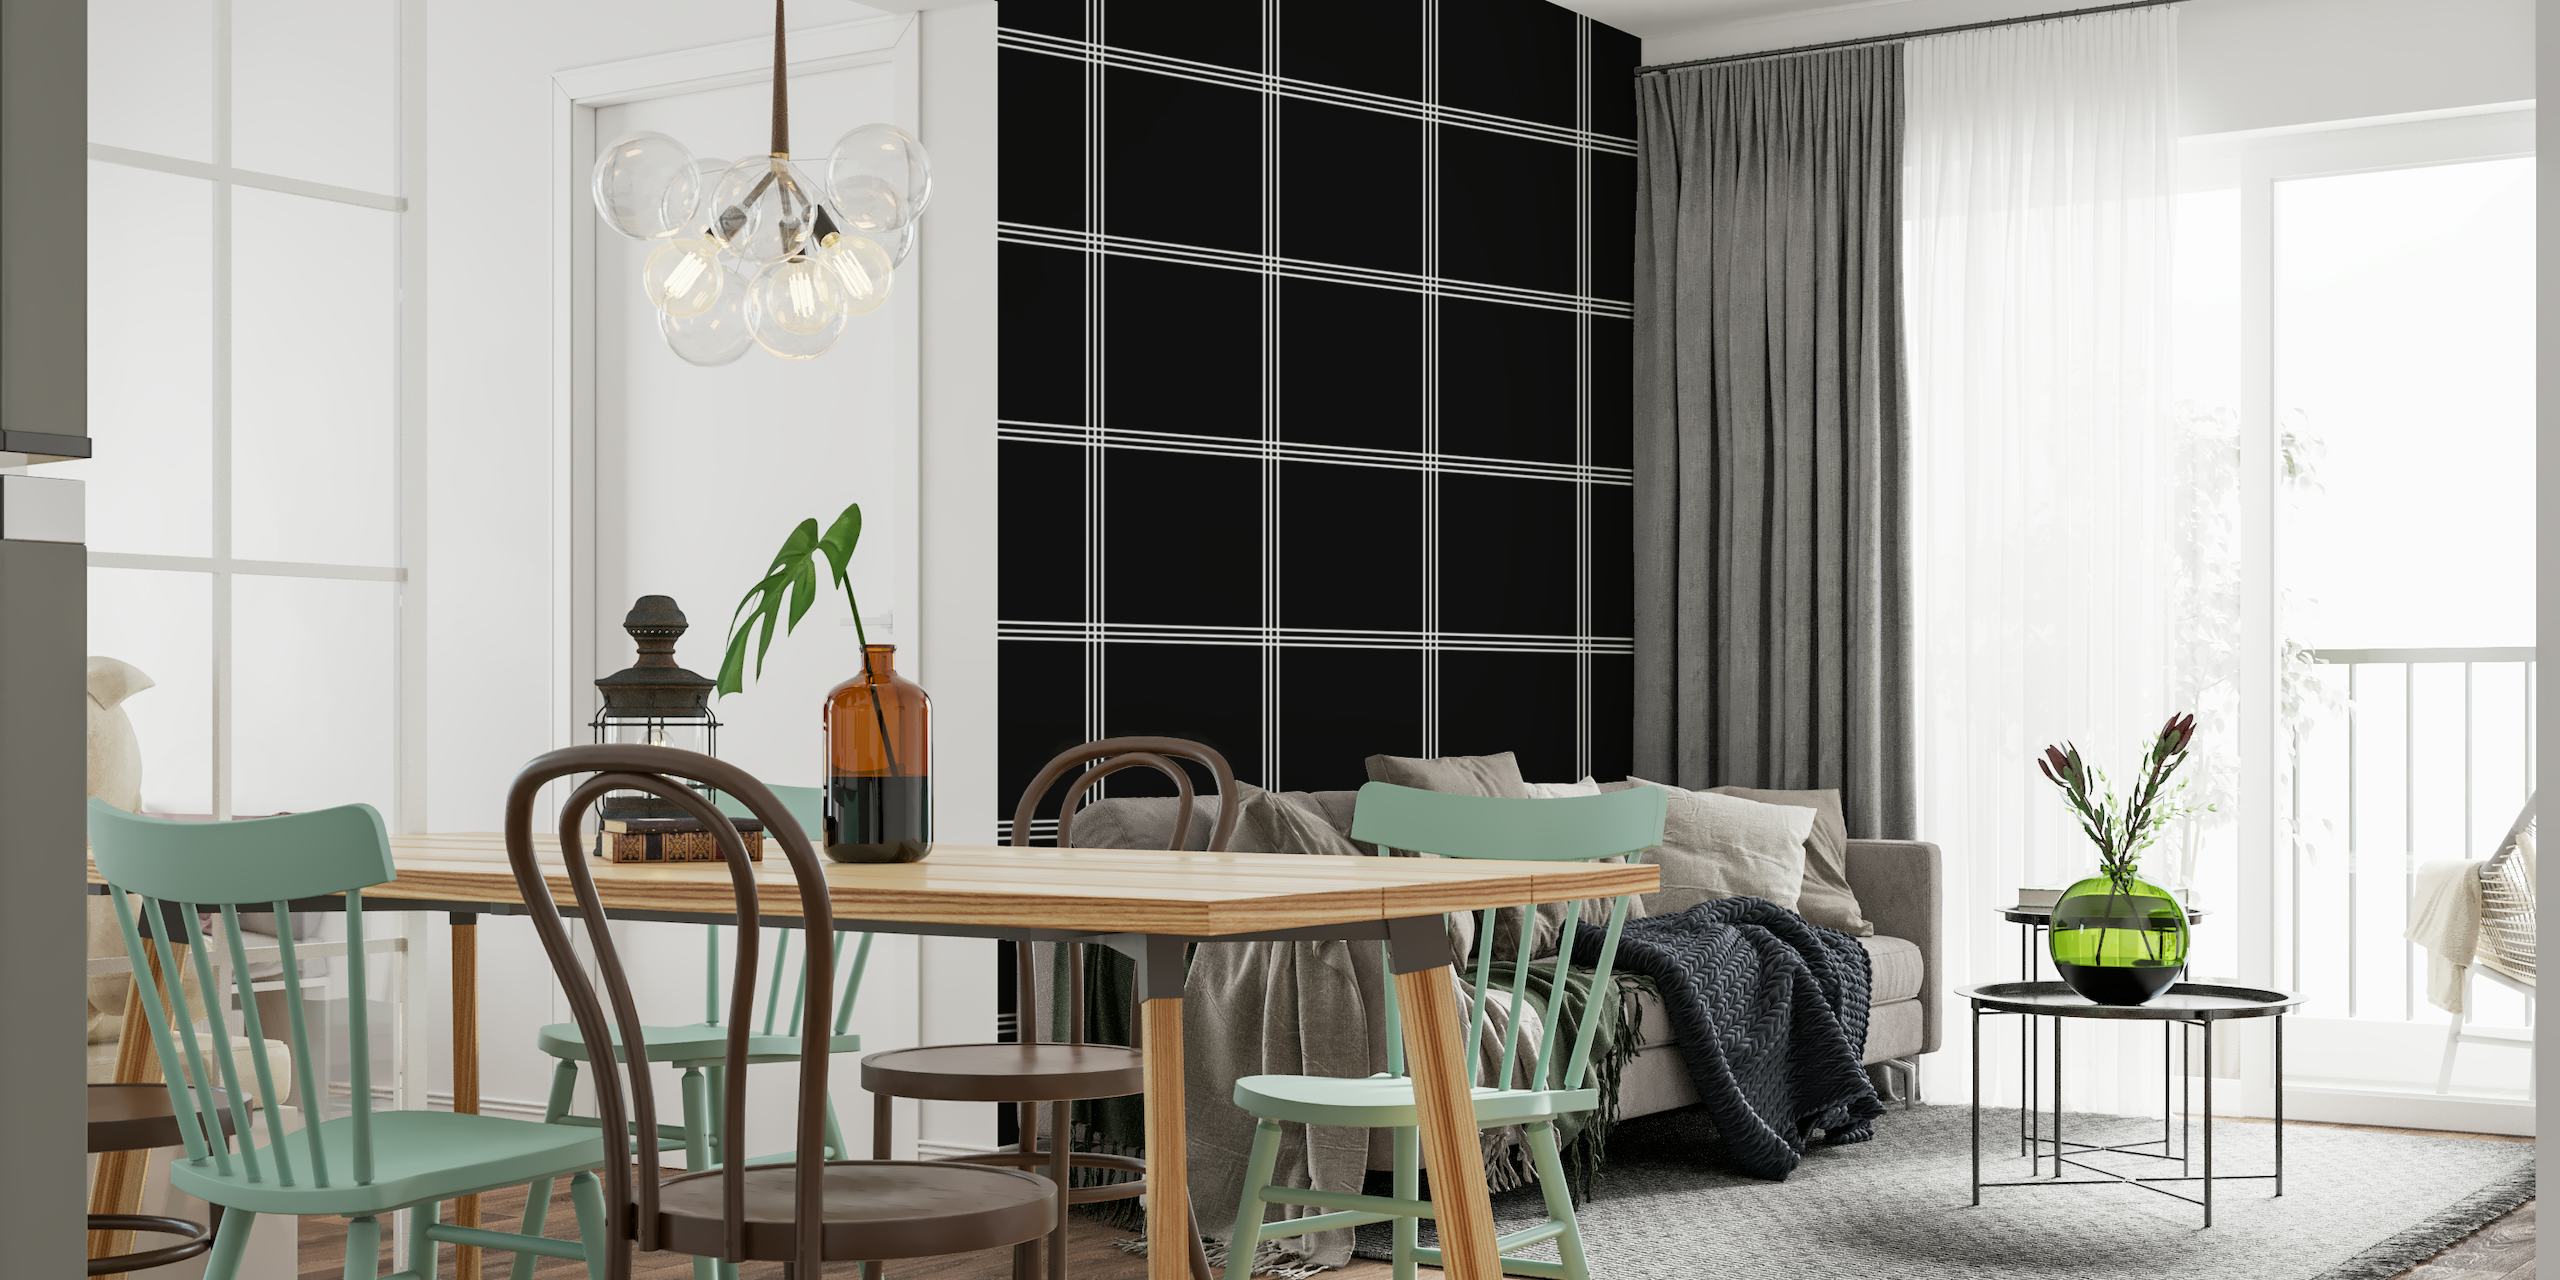 Black and white grid wall mural